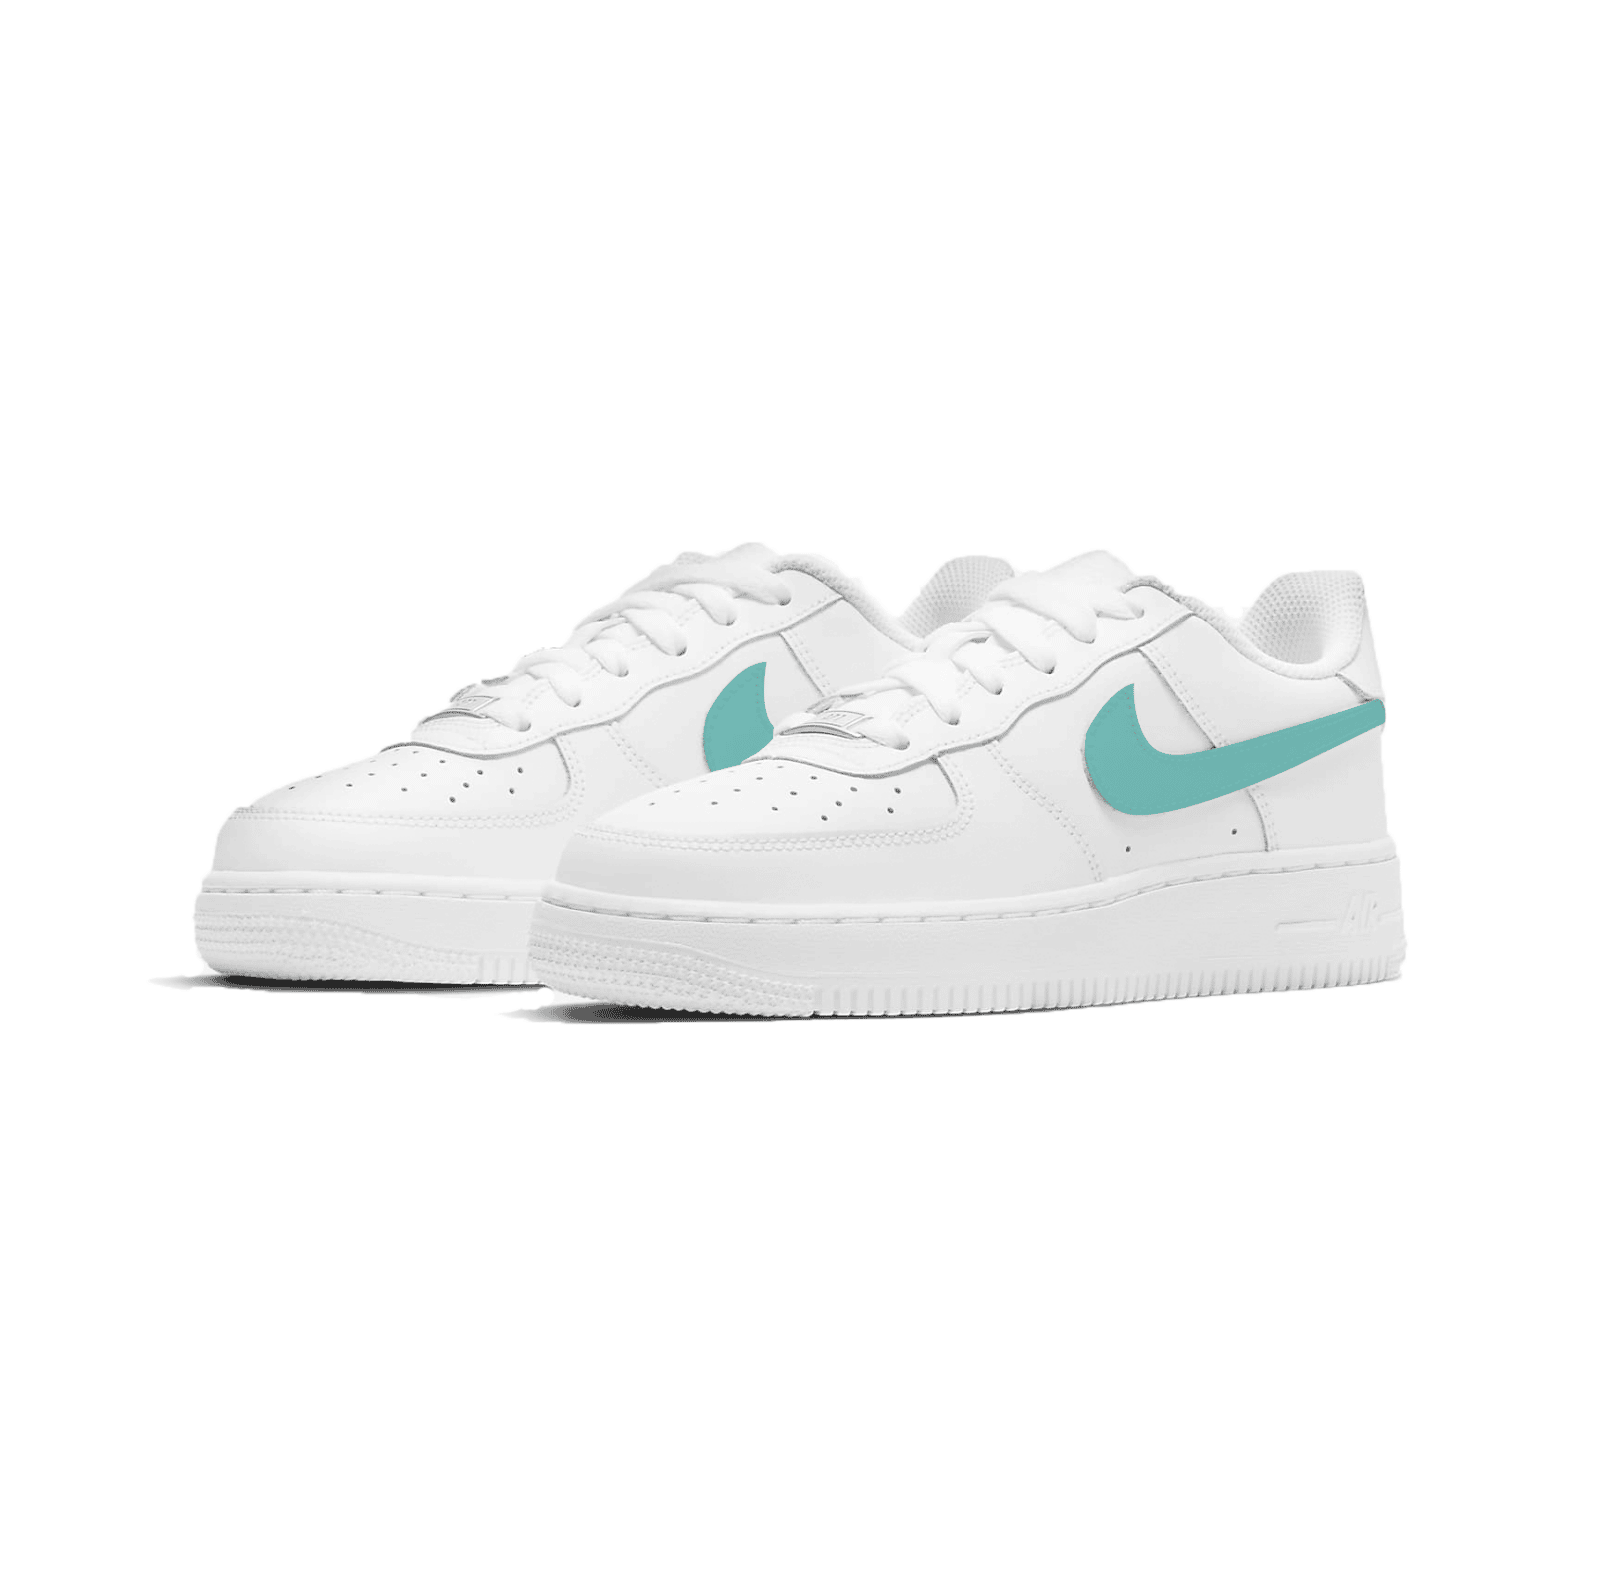 Air force one Pastel